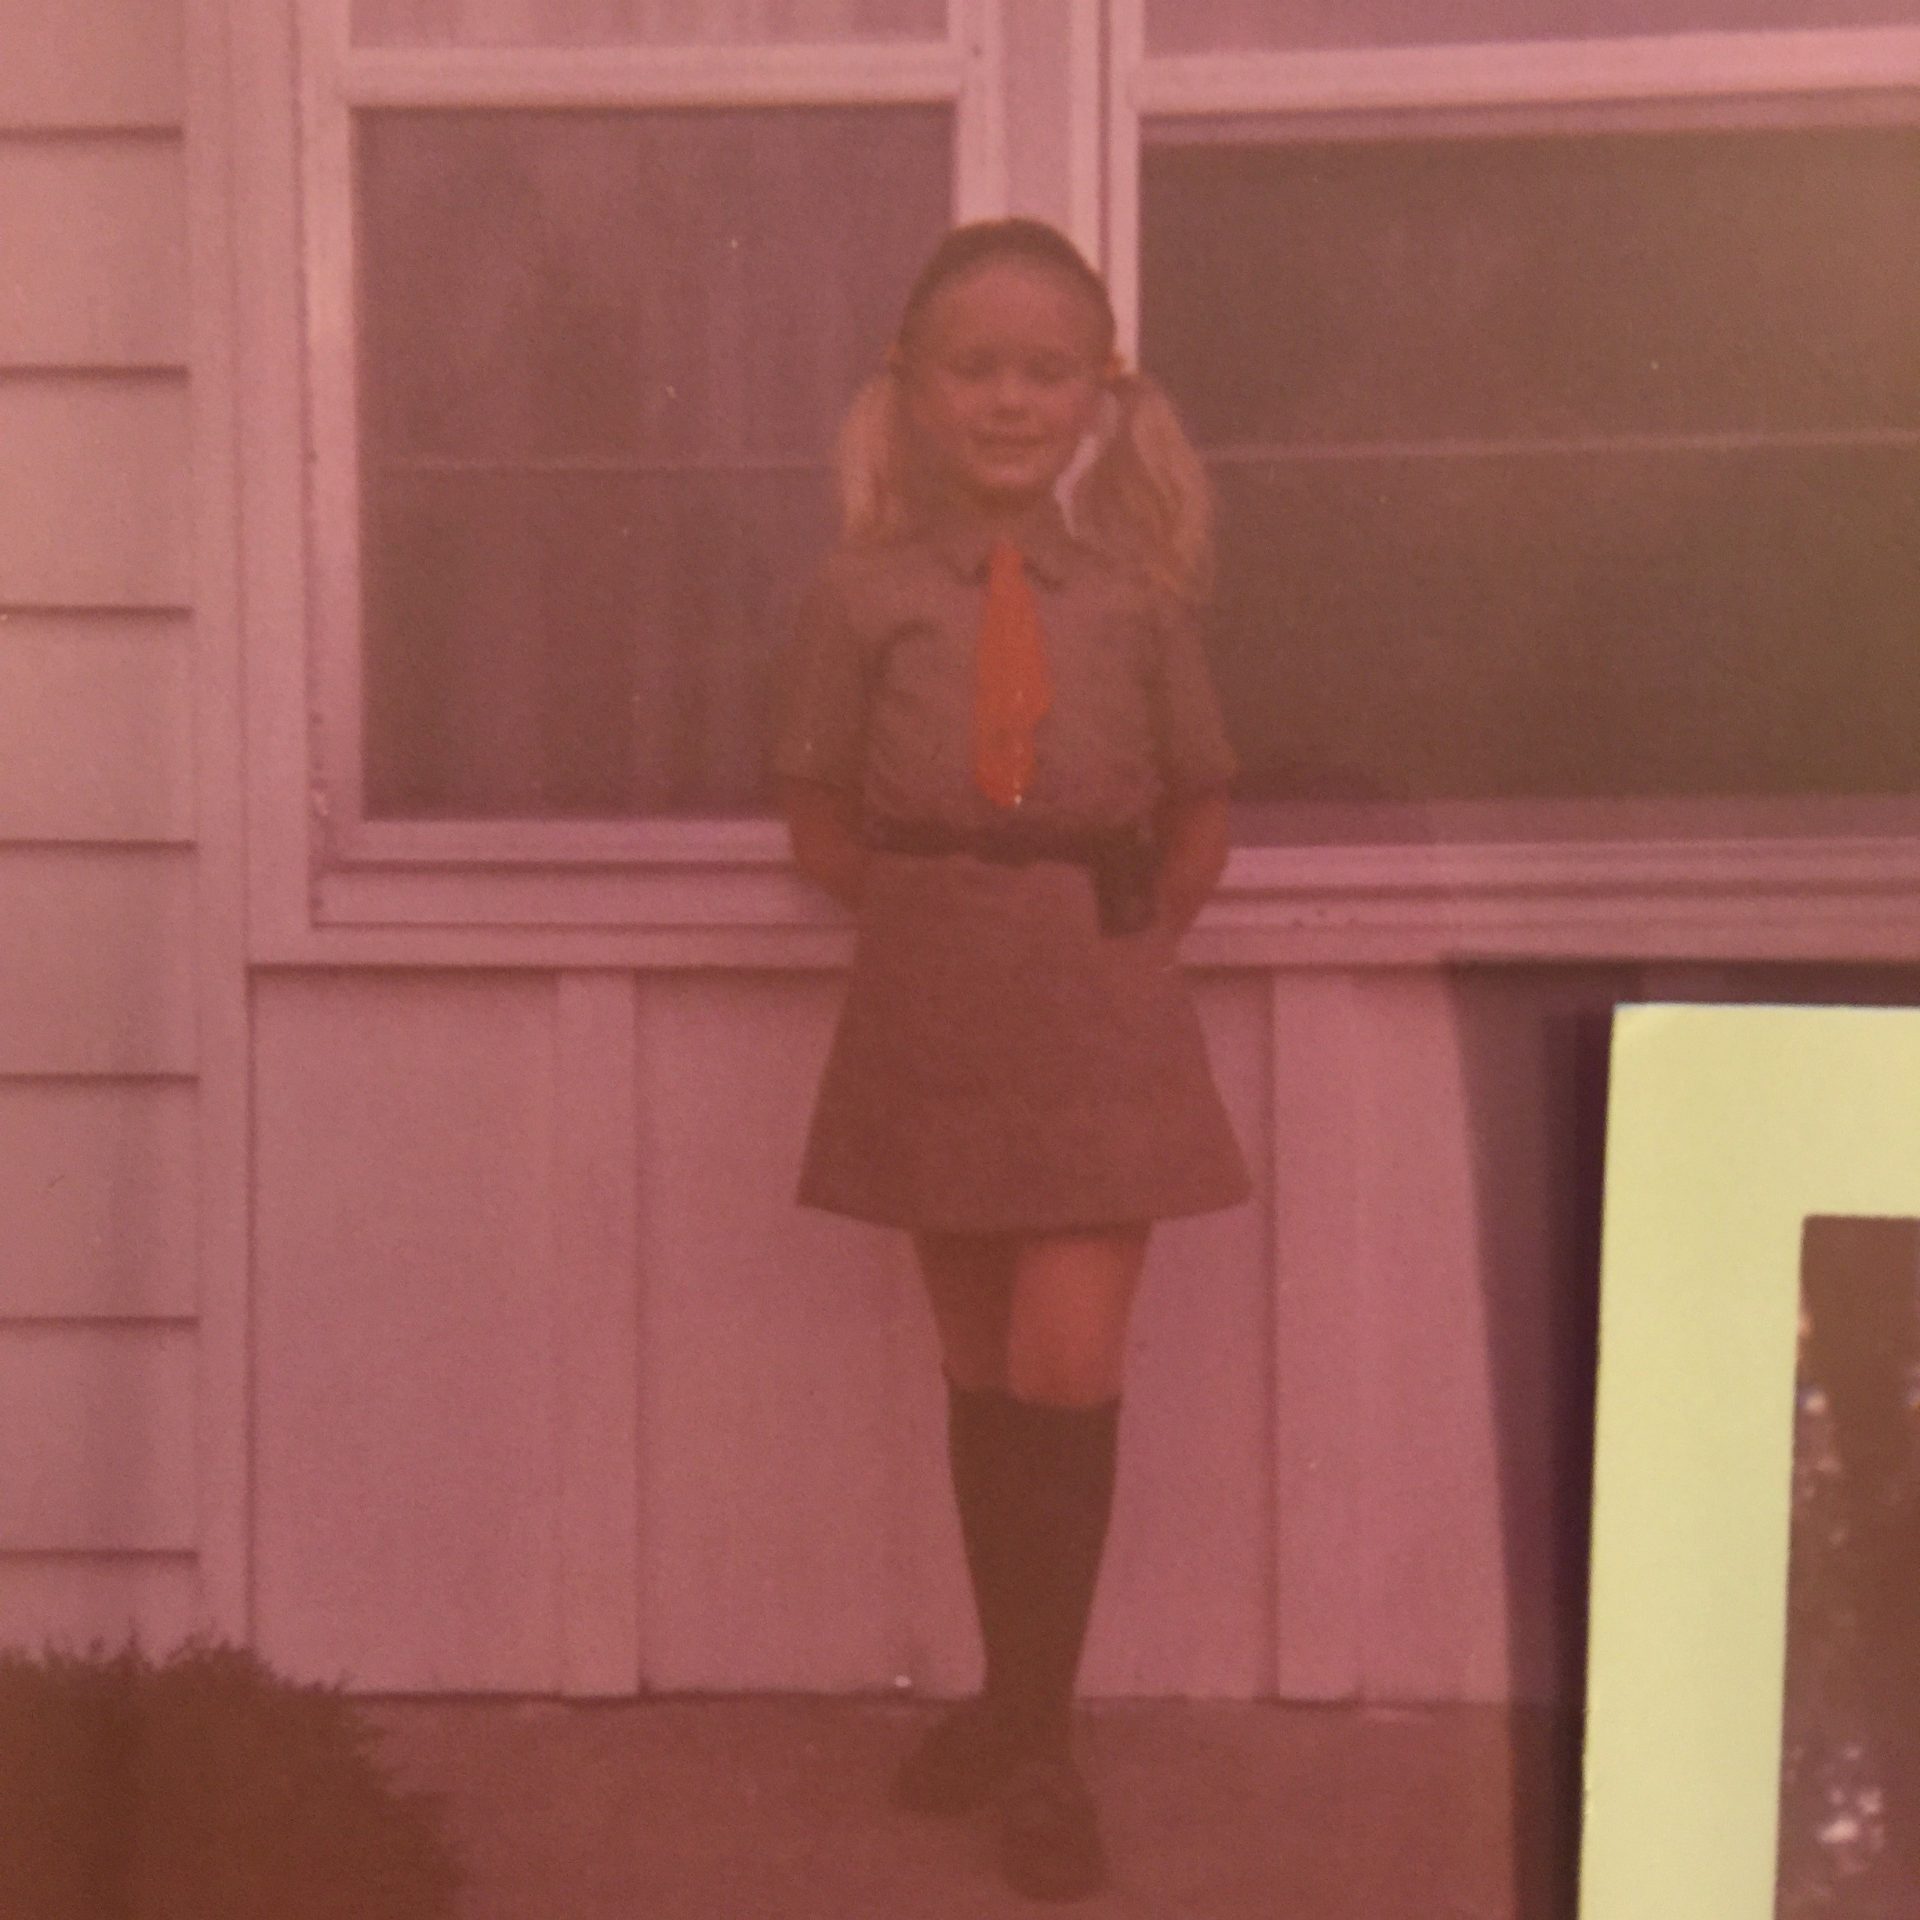 Lori gets ready to head off to her Girl Scout Brownie investiture ceremony in 1970.